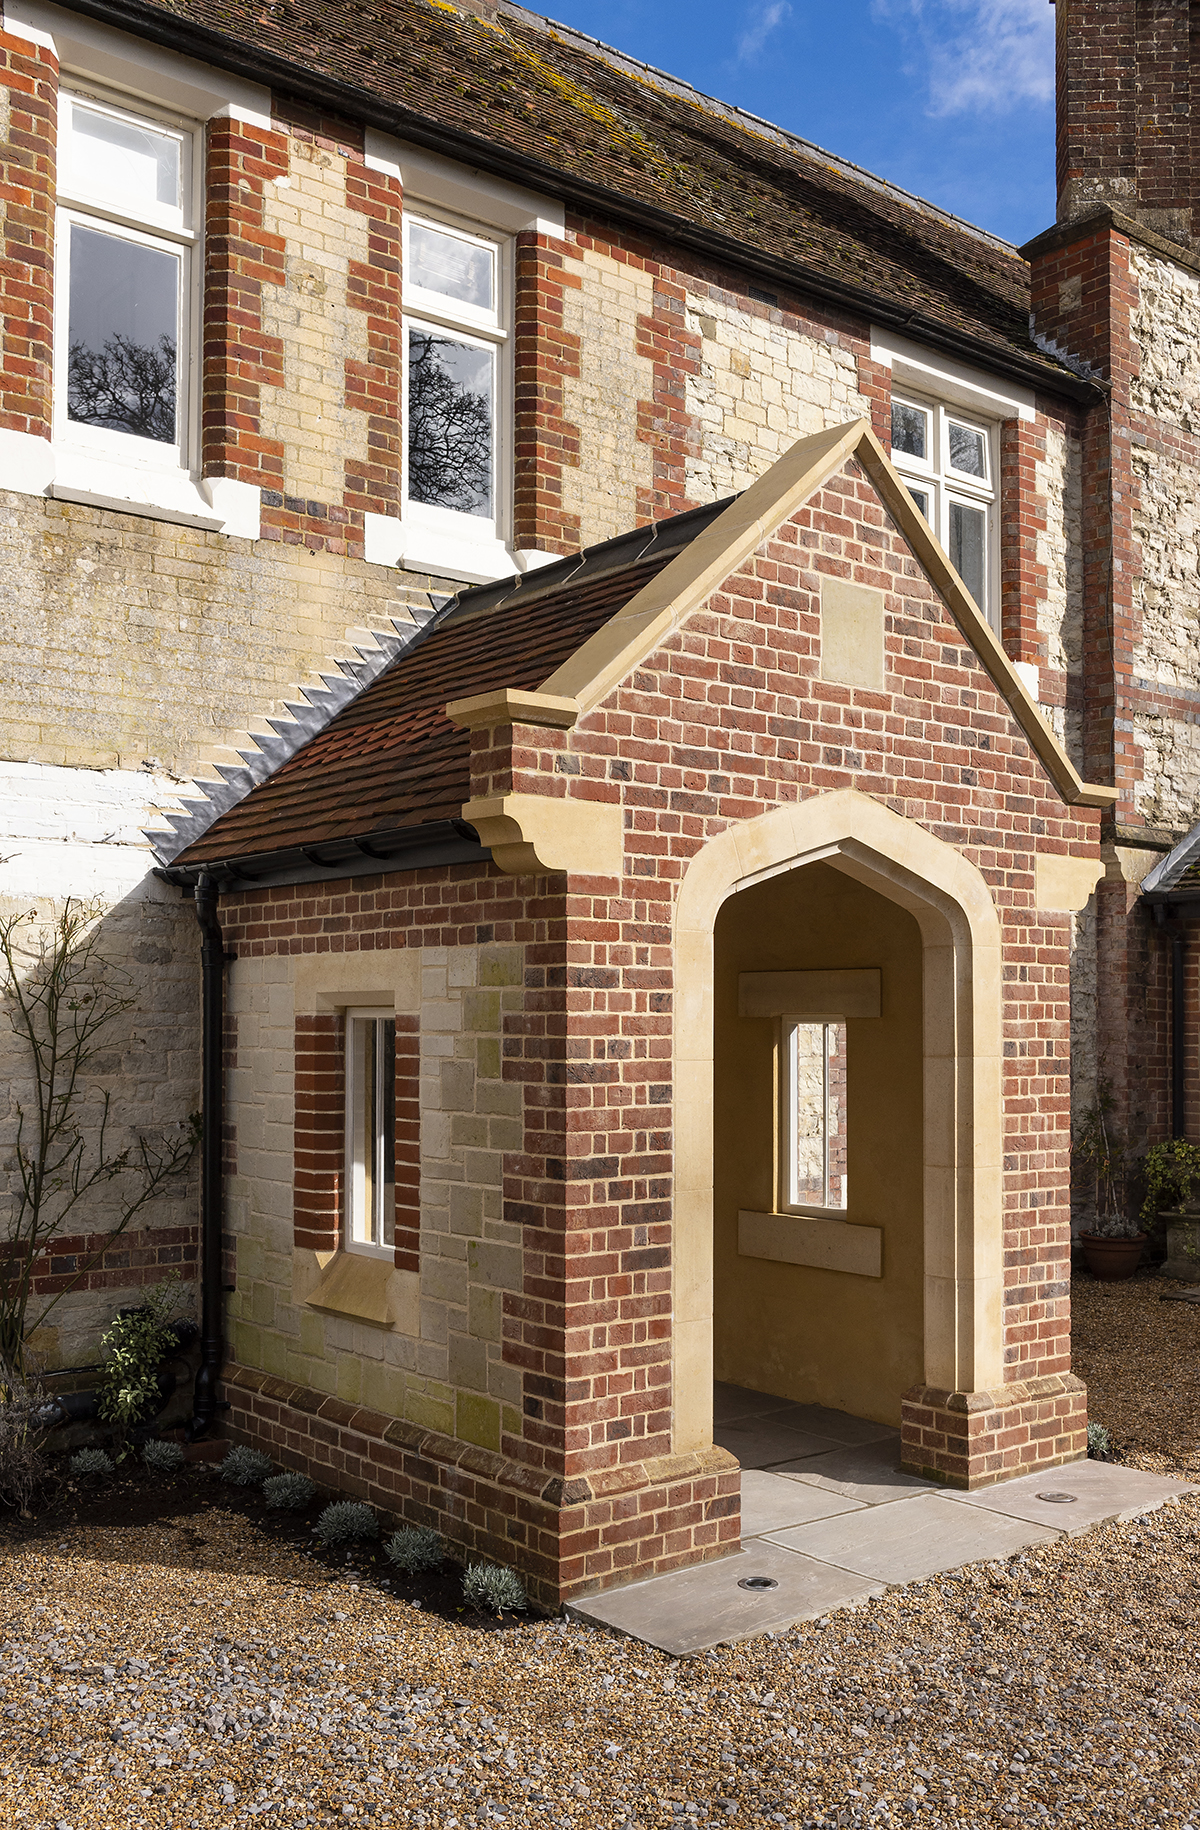 03-elsted-porch-rectory-house-extension-handmade-bricks-bath-stone-arch-stonemasonry-architecture-chichester-west-sussex-south-downs-national-park-uk-rider-stirland-architects.jpg.jpg